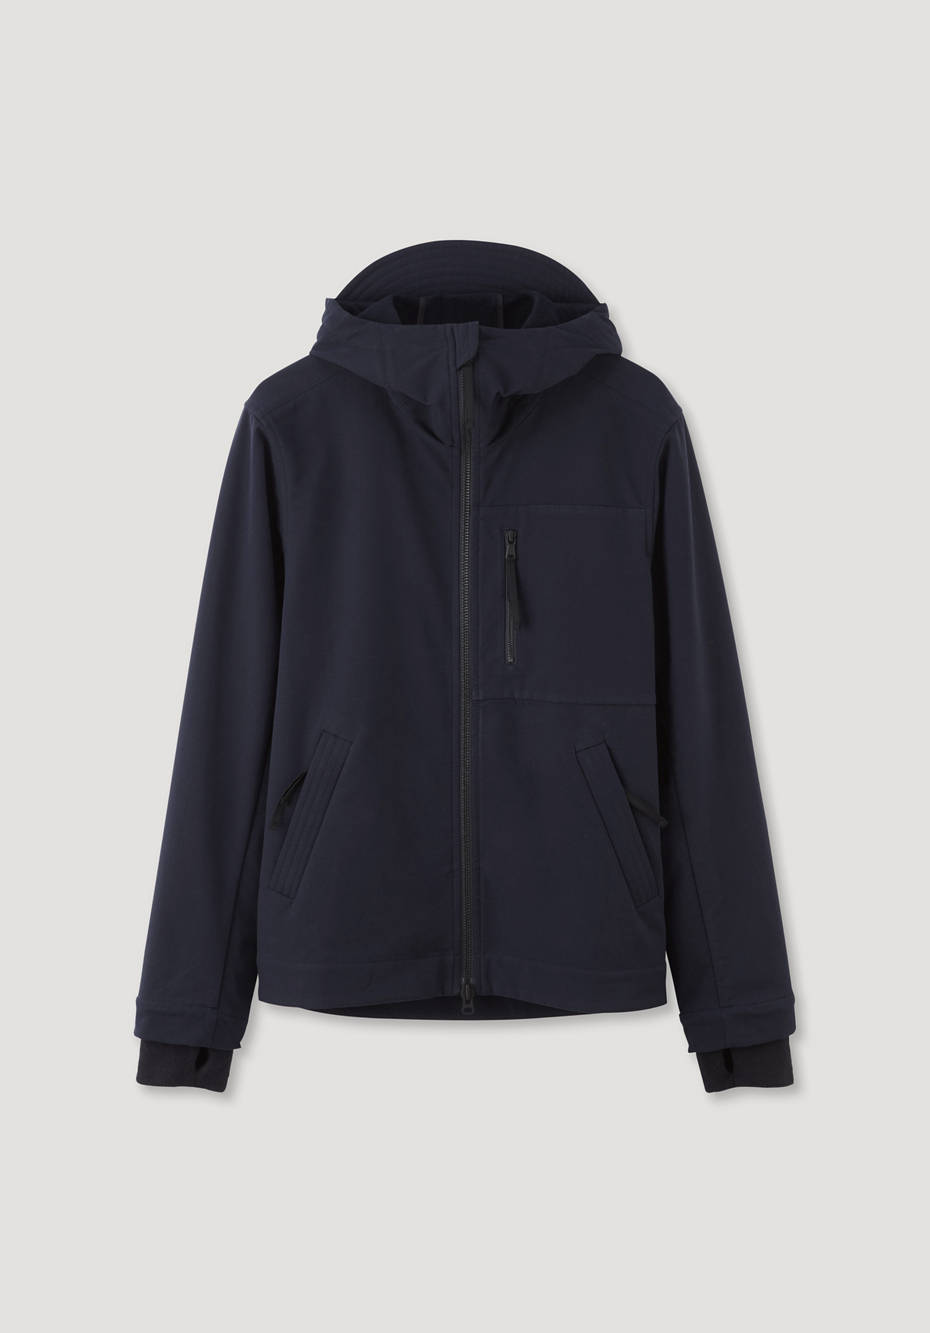 Softshell hooded jacket made from organic cotton